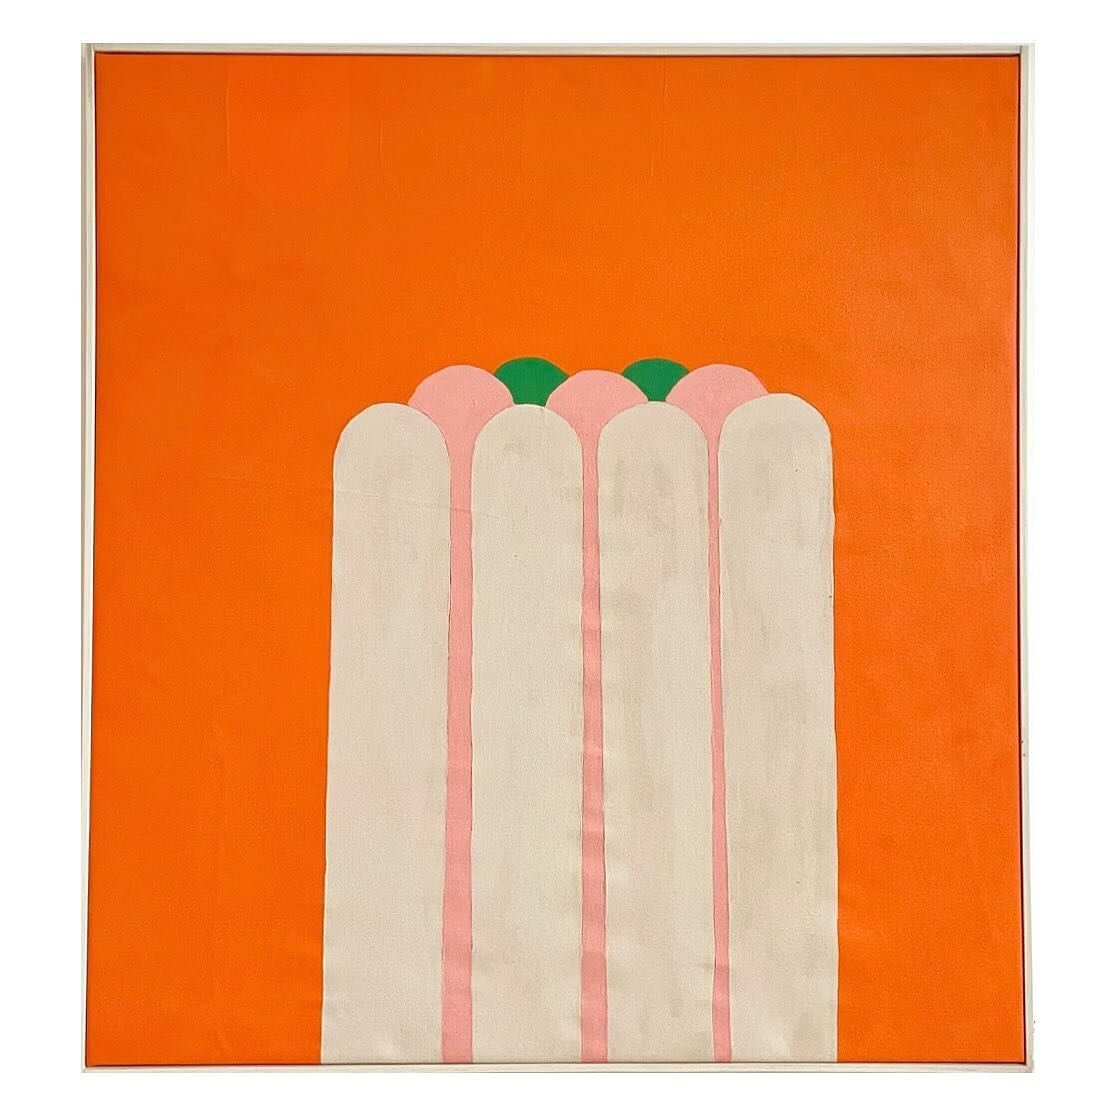 Friday evening plans?! Santa Anita / First Friday Art Opening @zacharyschomburg at @makerspacesellwood 

Santa Anita is a recent series of paintings initially sparked by the colors and shapes Schomburg found in an old closed-off section of the Santa 